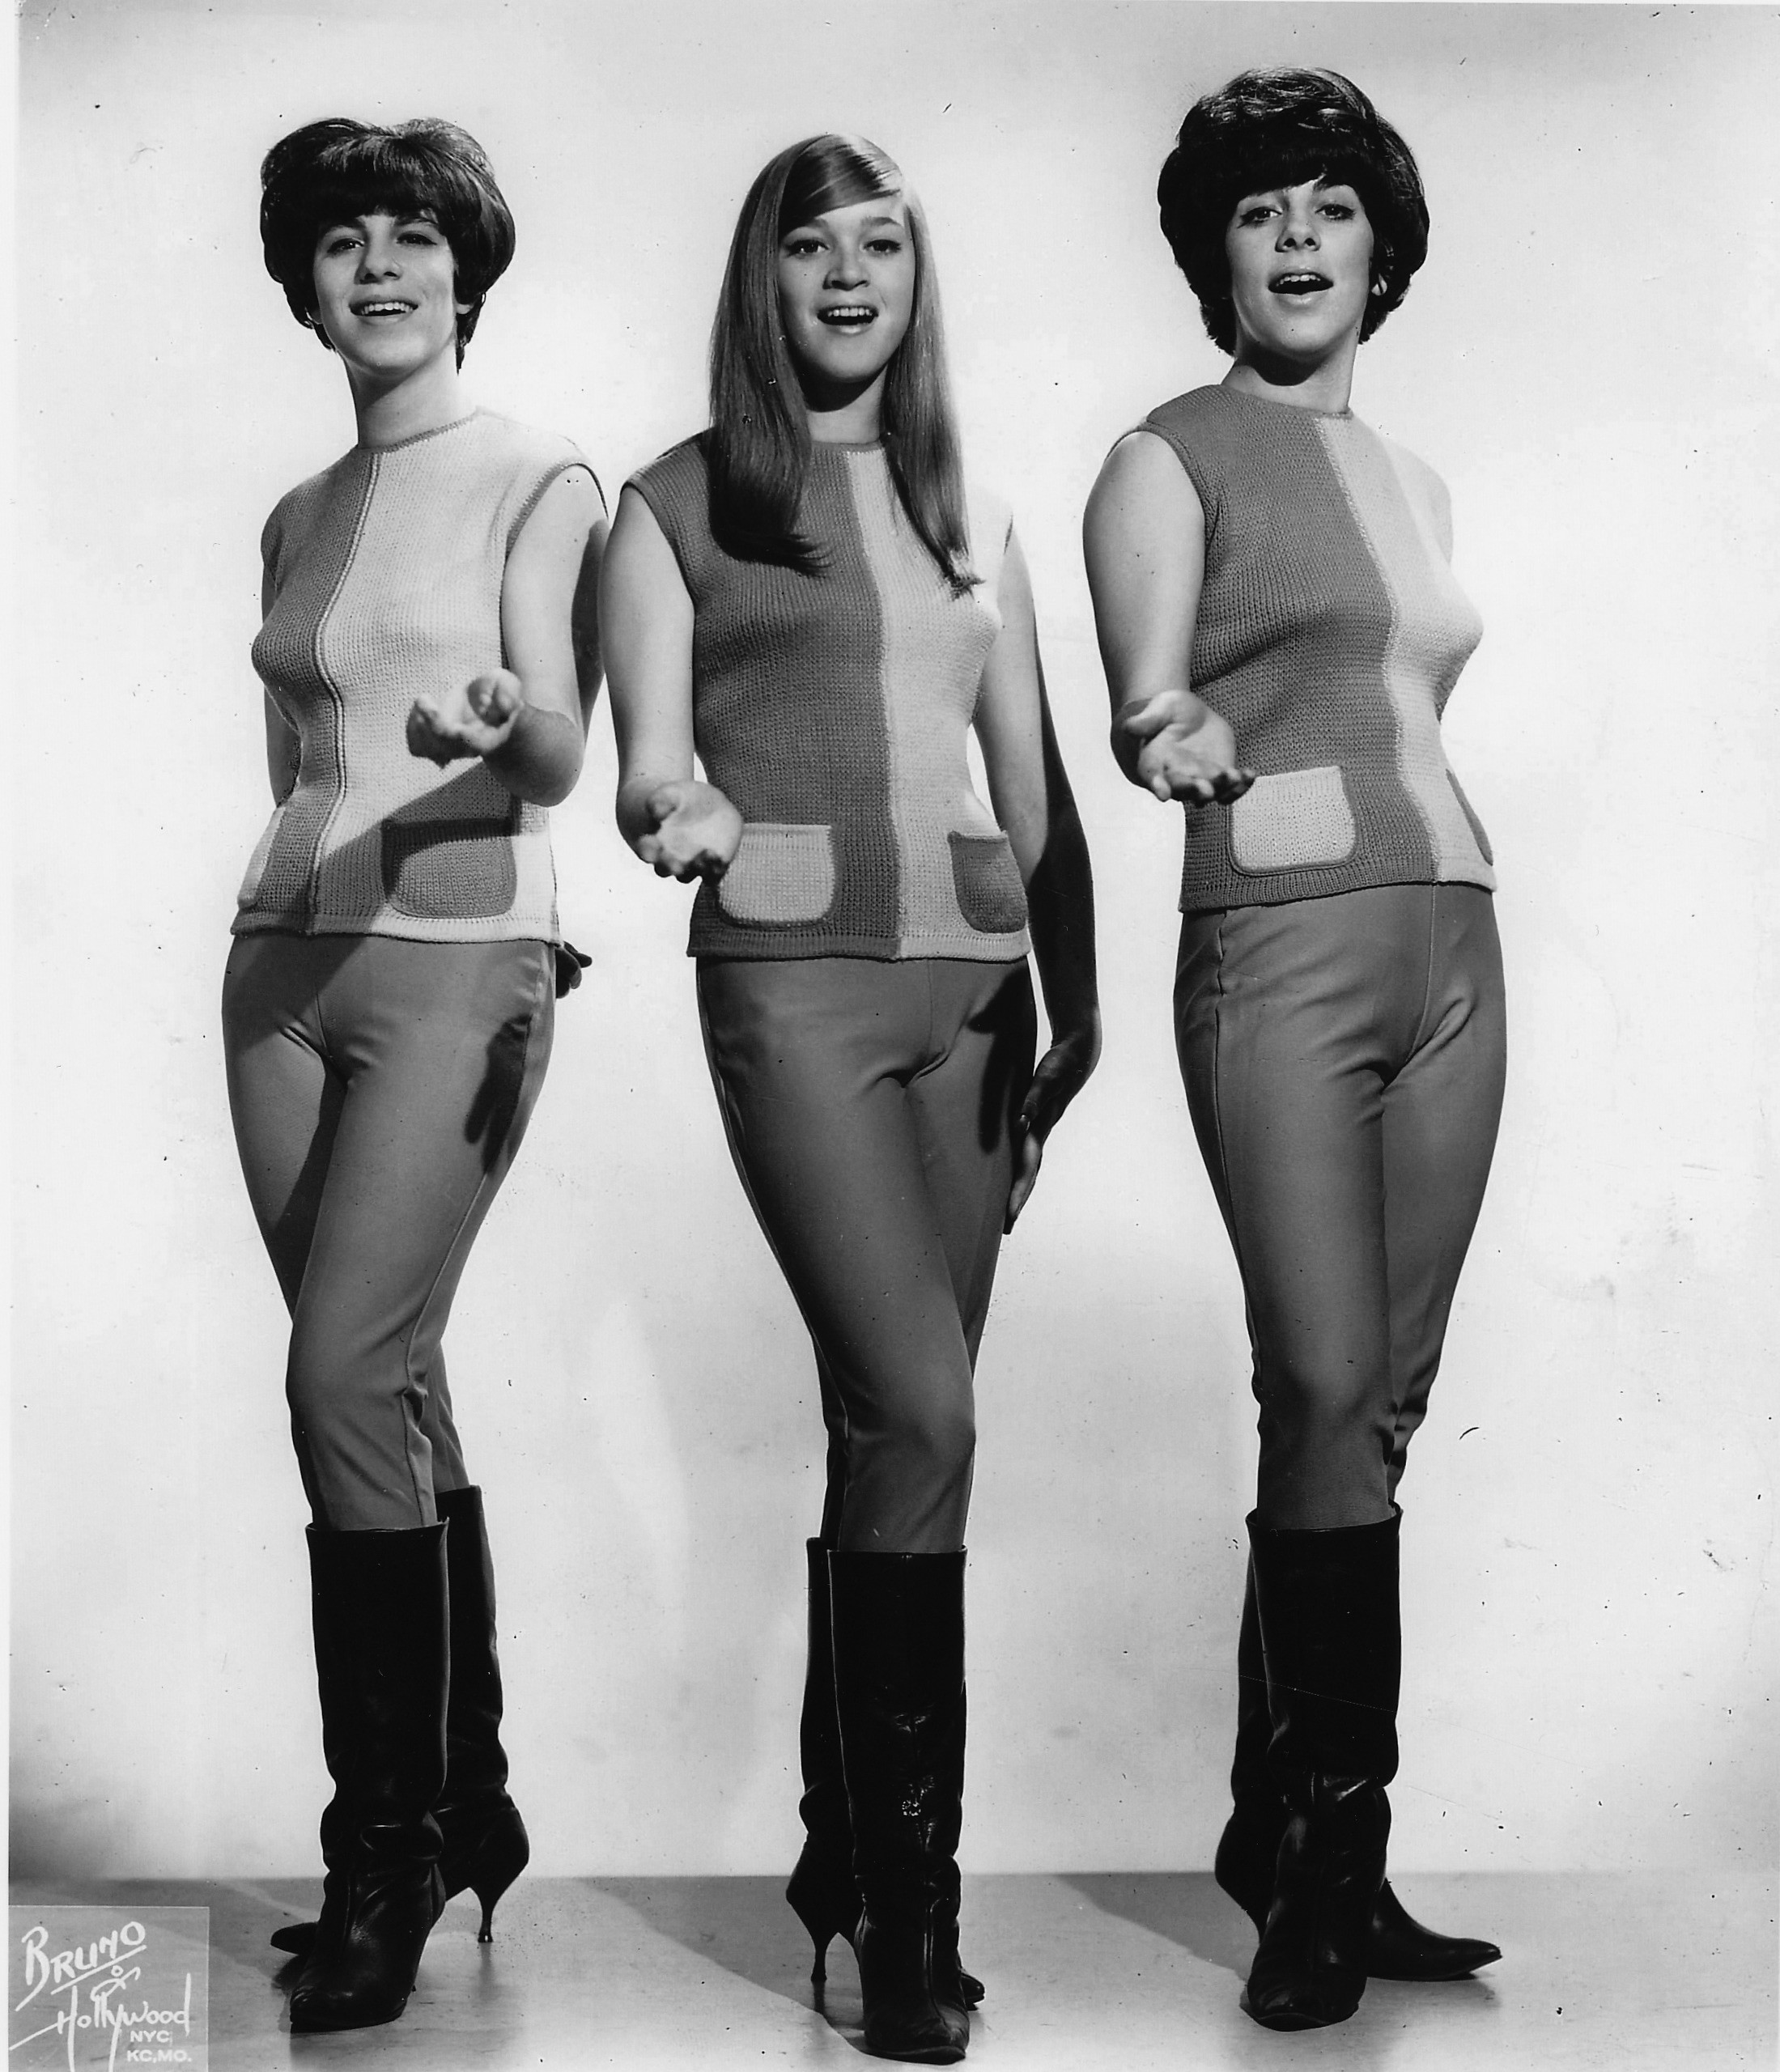 The Shangri-Las consisted of Mary Ann Ganser, Mary Weiss, and Marge Ganser (left to right)